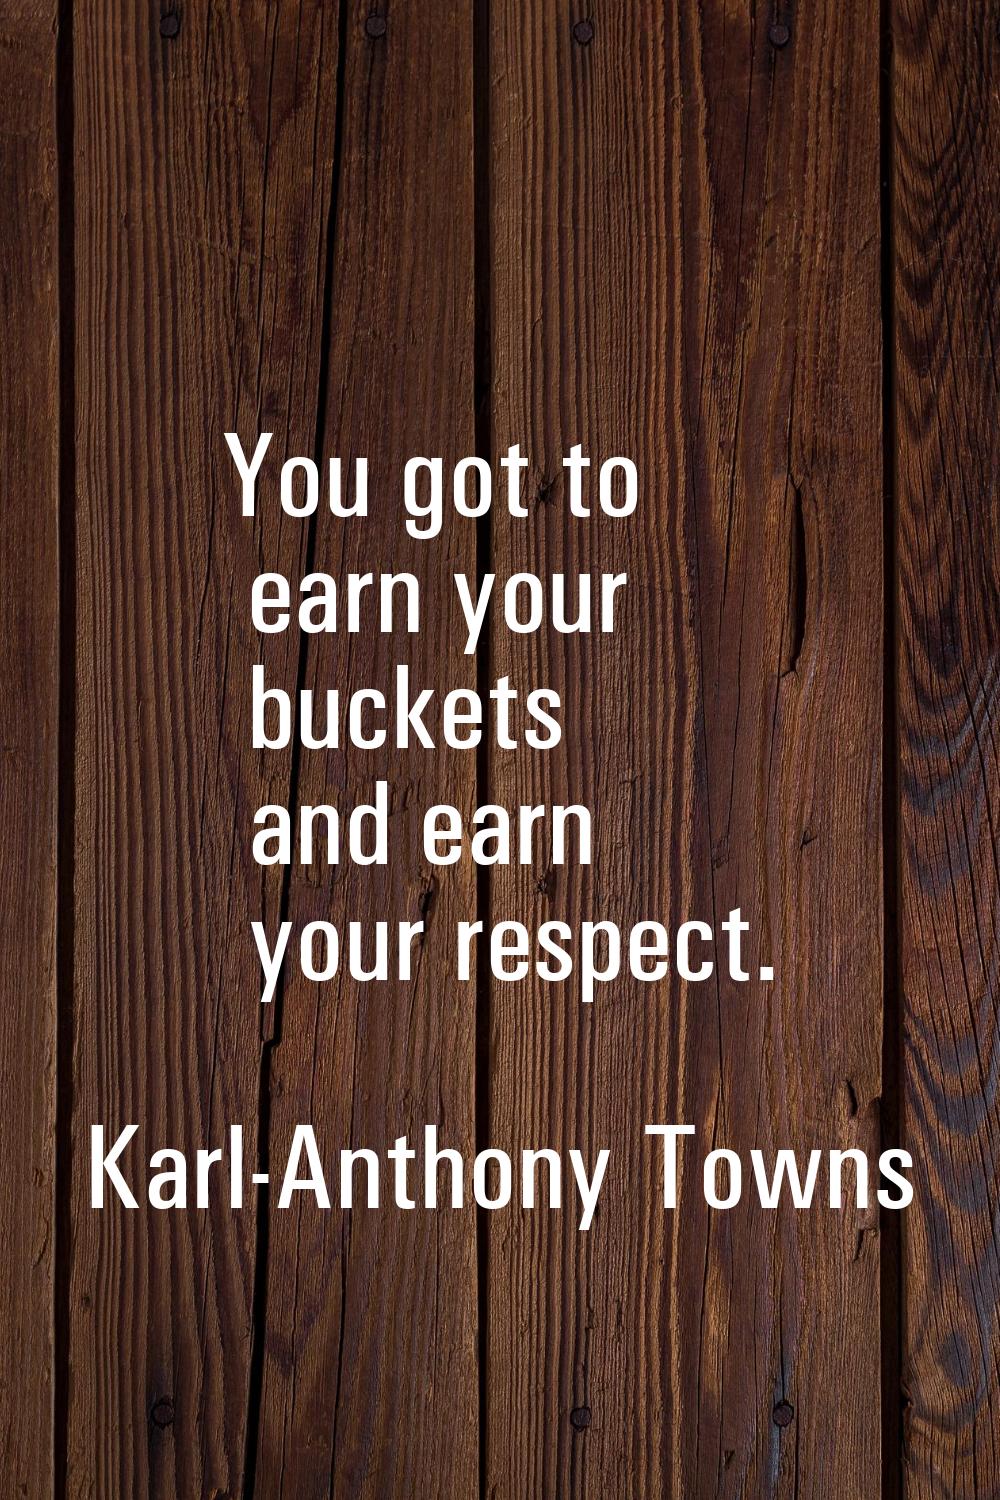 You got to earn your buckets and earn your respect.